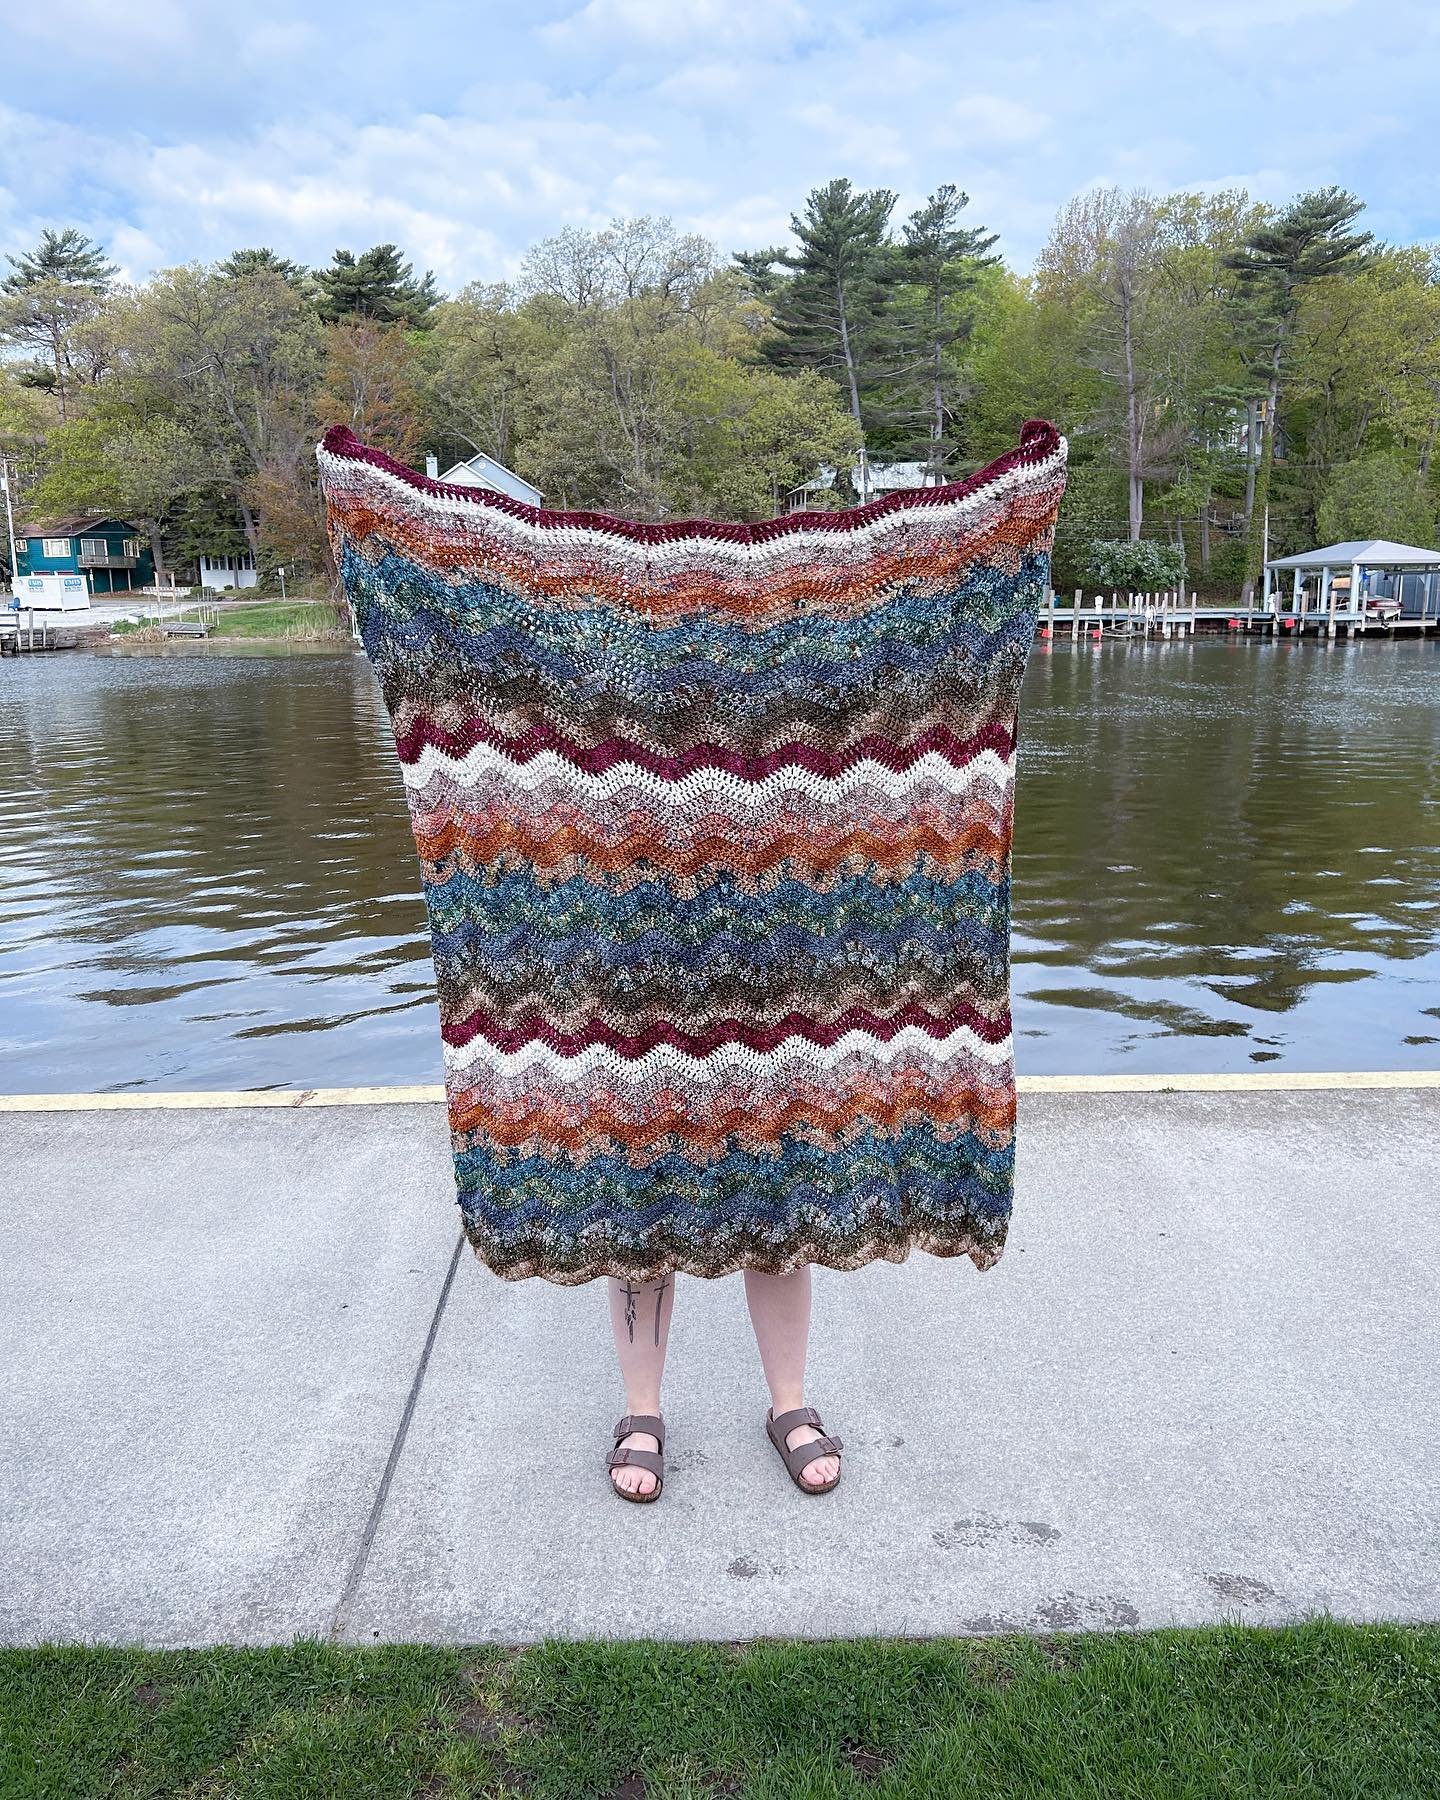 Here she is in all her finished glory! I finished this Hobbit/LOTR inspired #waveblanket just in time for our road trip up to Saugatuck, MI this weekend. Can&rsquo;t wait to take her out on more adventures!
.
.
#crochetgram #crochetersofinstagram #cr